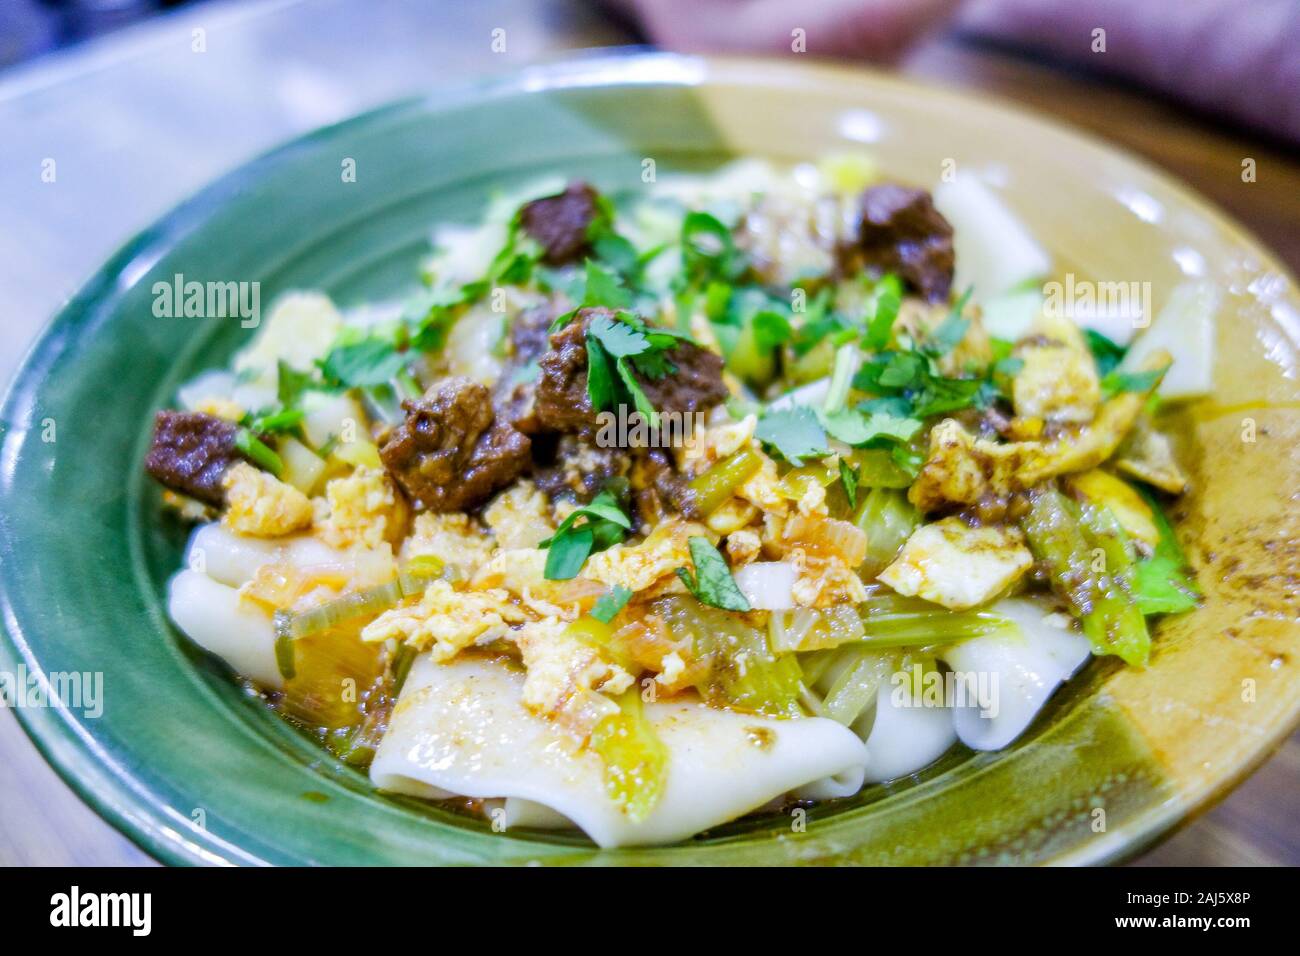 A bowl of biang biang mian noodles, a famous dish from the city of Xi'an, at the Muslim street night market in Xian, in the Shaanxi province of China Stock Photo